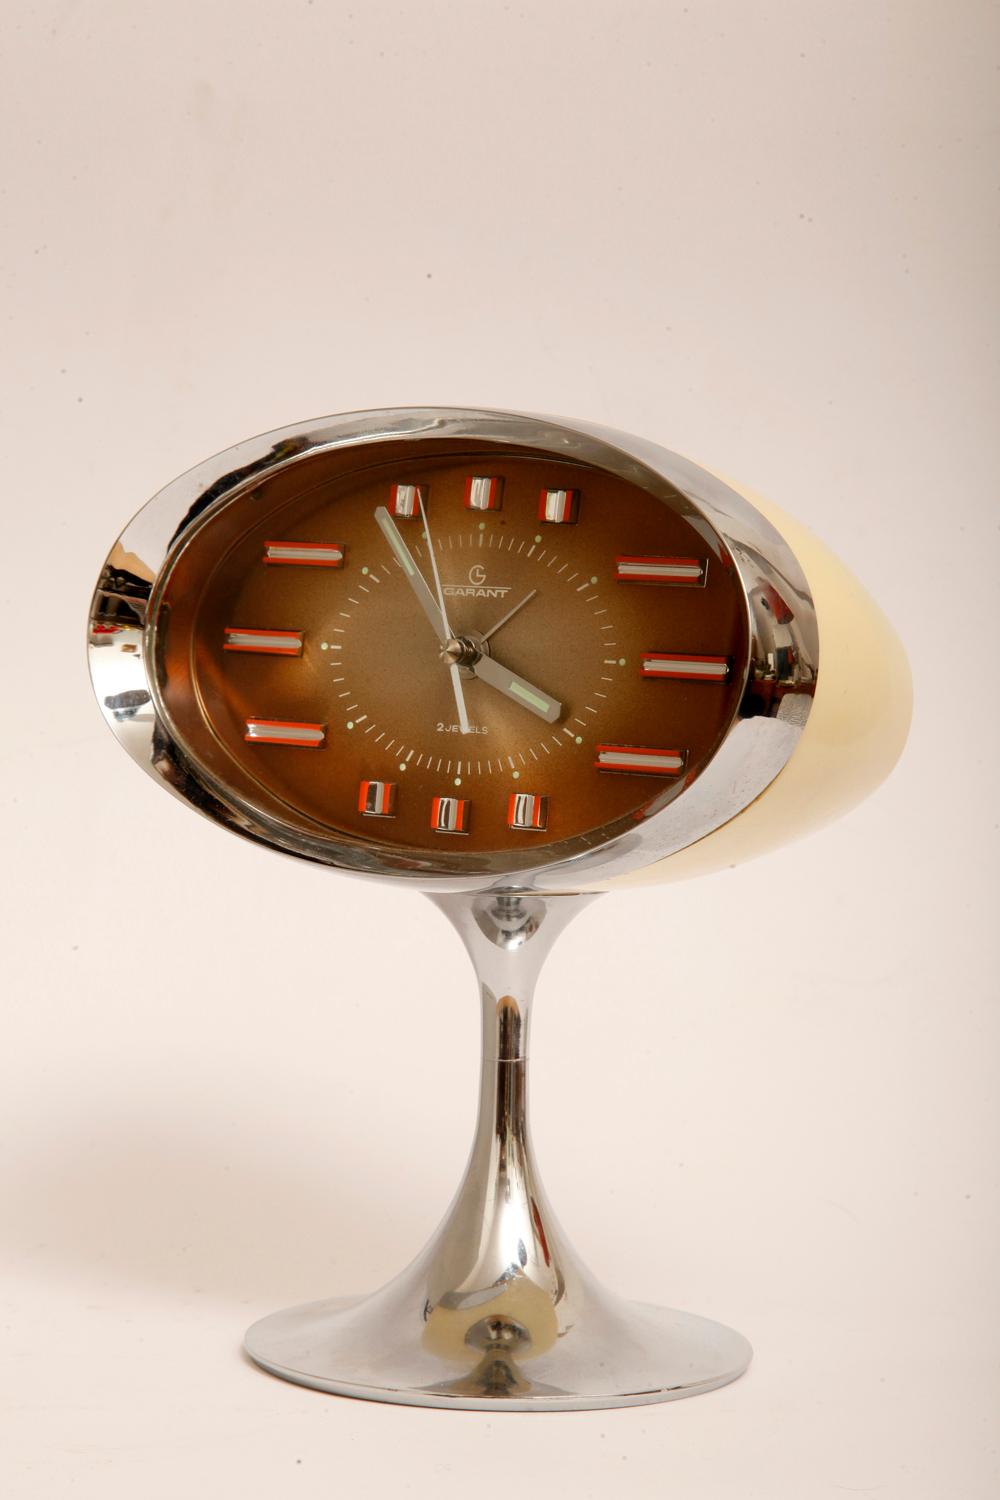 Japanese Space Age Alarm Clock Garant, Plastic and Chromed, 1970s For Sale 5